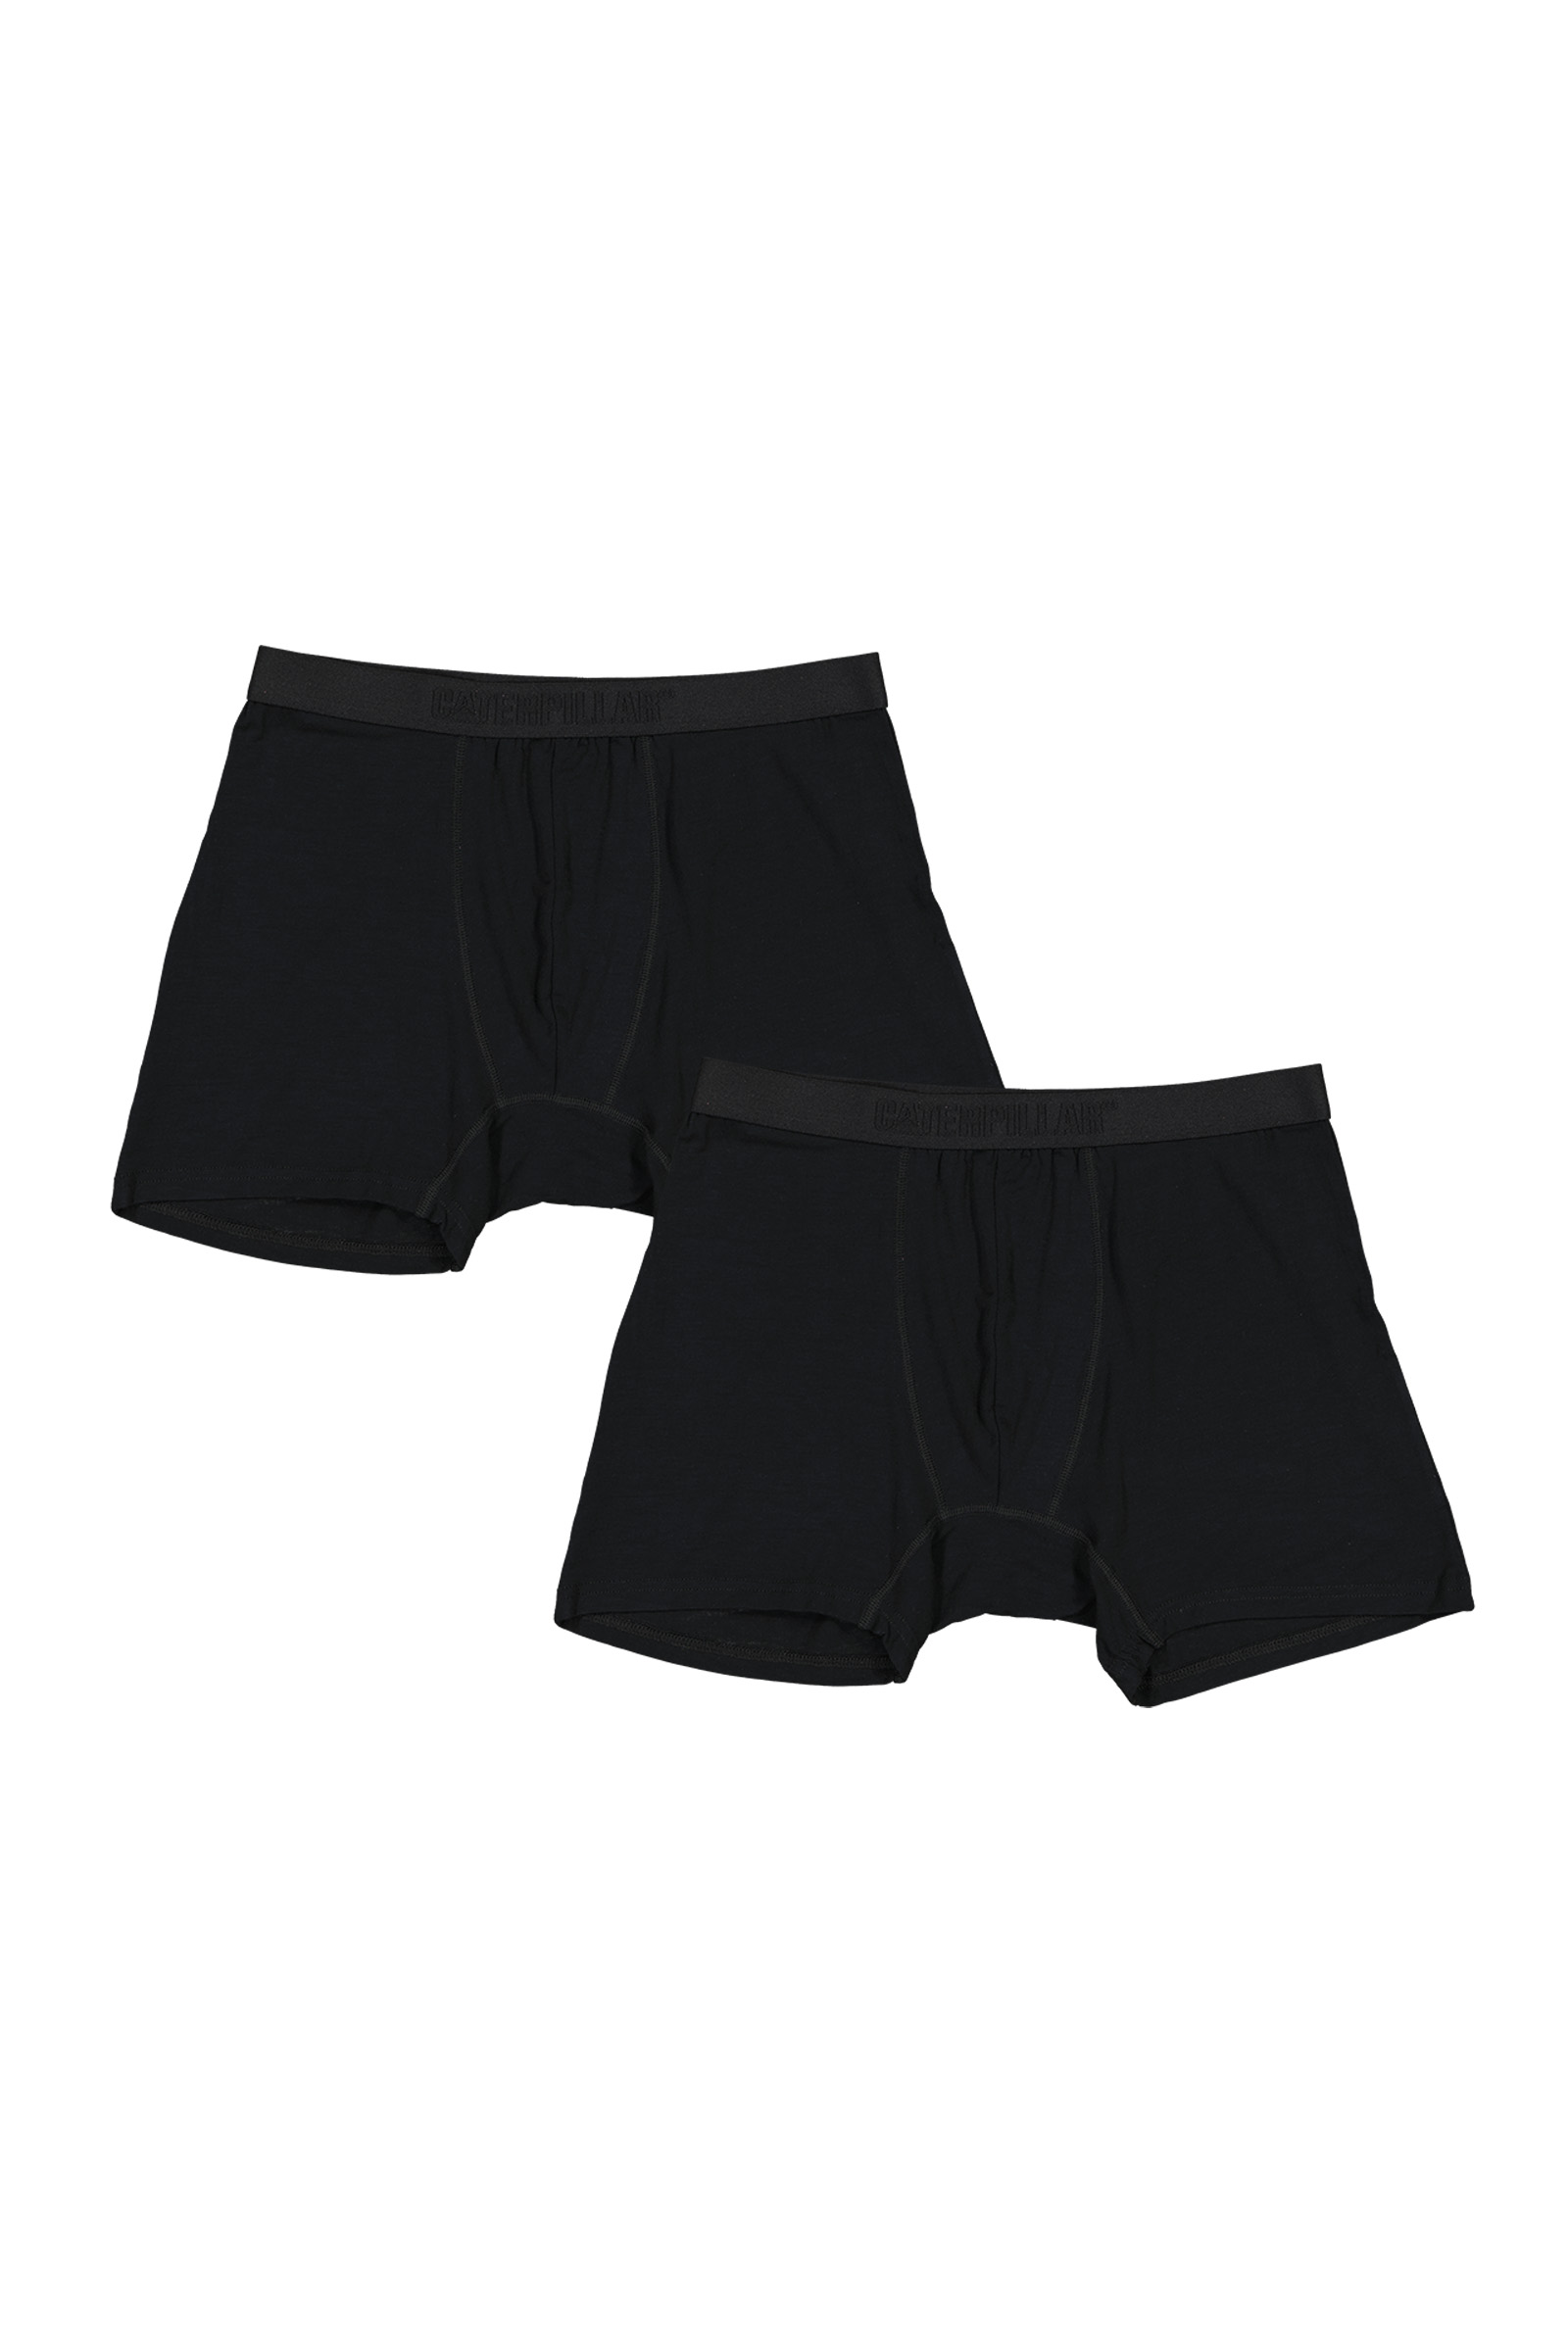 FOUNDATION BOXER BRIEF 2-PACK